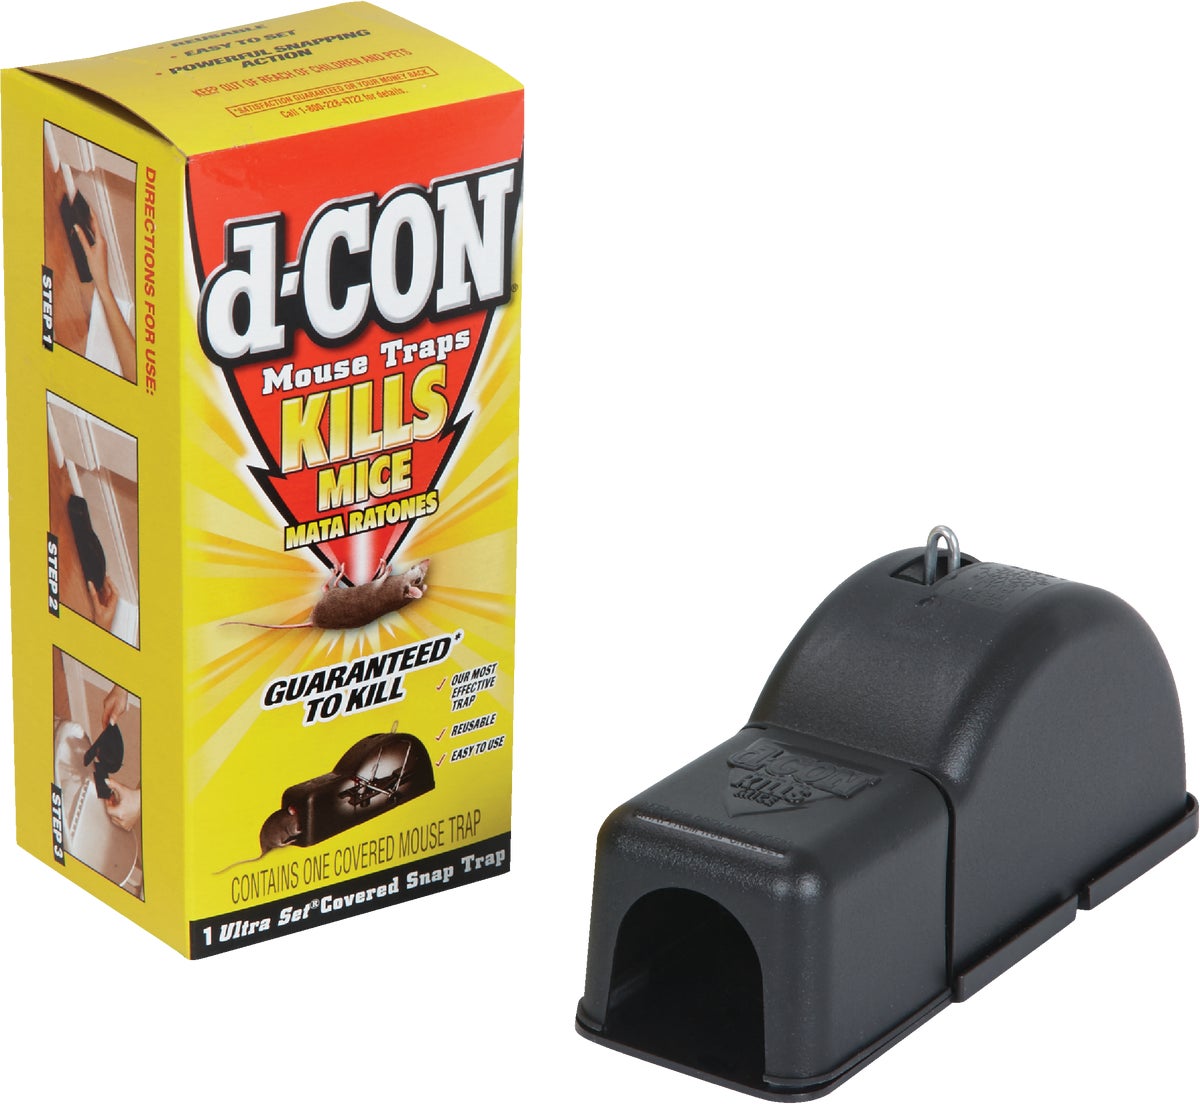 2 Traps New D-Con Reusable Ultra Set Covered Mouse Snap Trap 